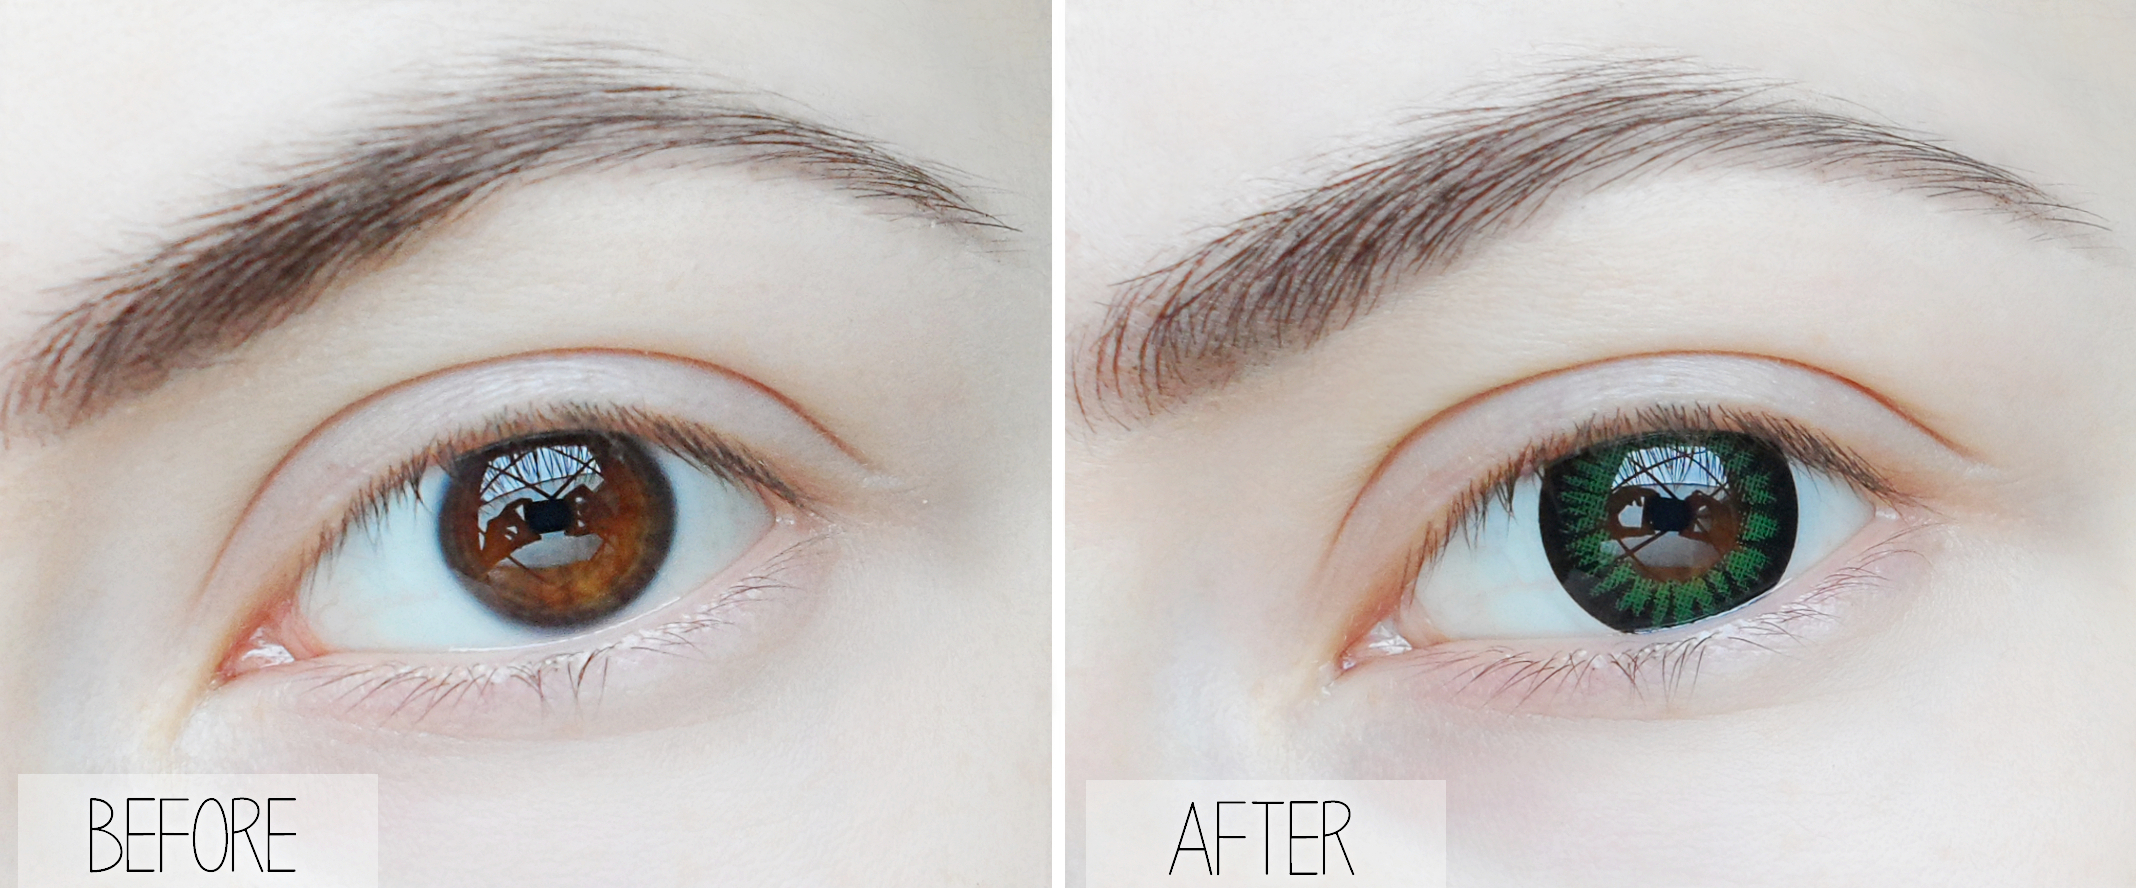 blogger review green circle lenses by klenspop, the before and after pcitures and demonstration, チュートリアルで目を拡大するアニメの目の外観, увеличивающие лизы дя глаз отзывы, фото до и после блог